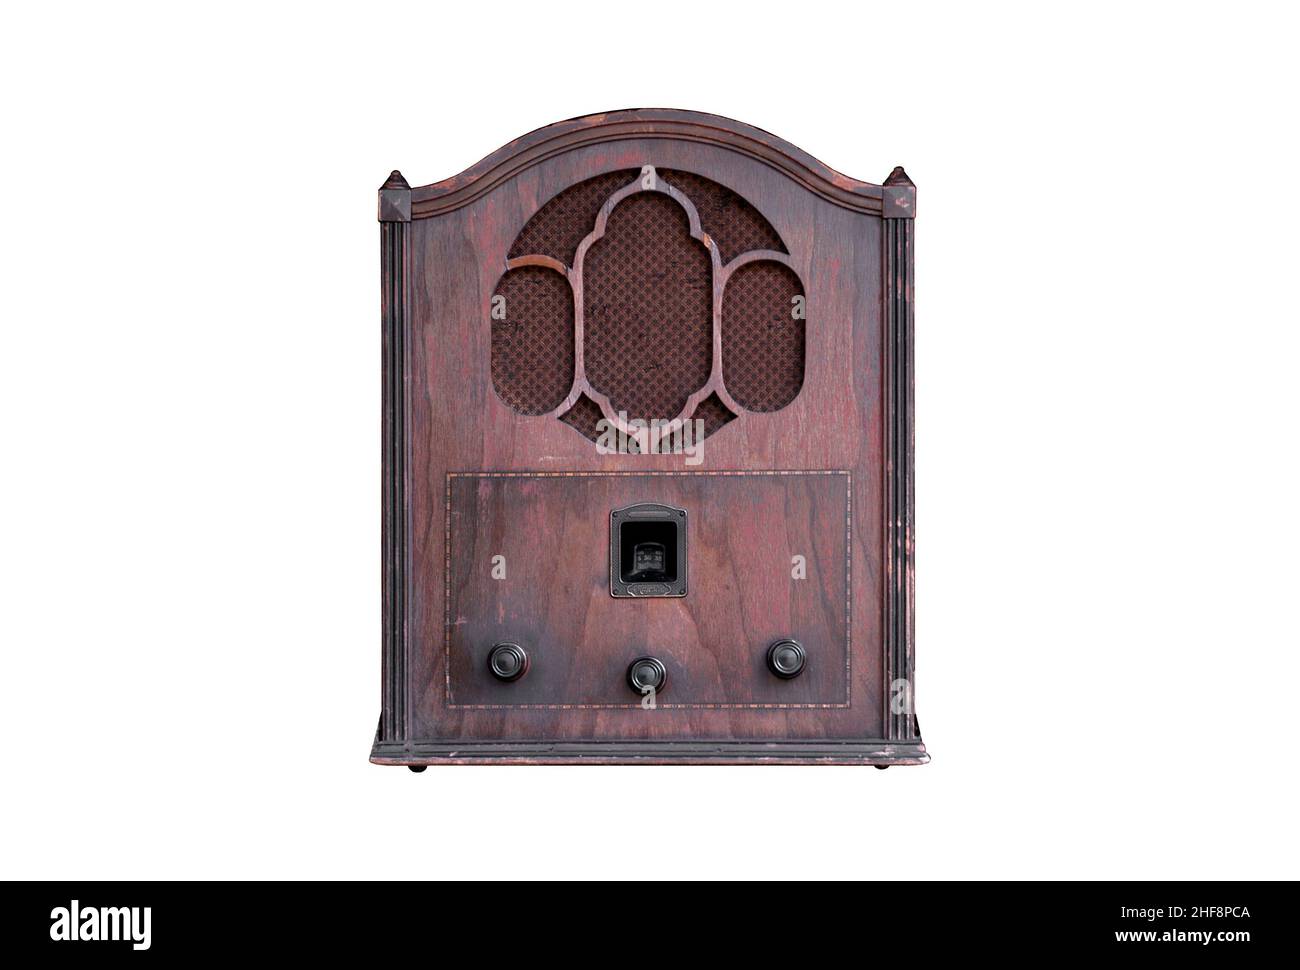 Cathedral style radio from the 1930's. This early wooden radio broadcast news during the 'Great Depression. Stock Photo